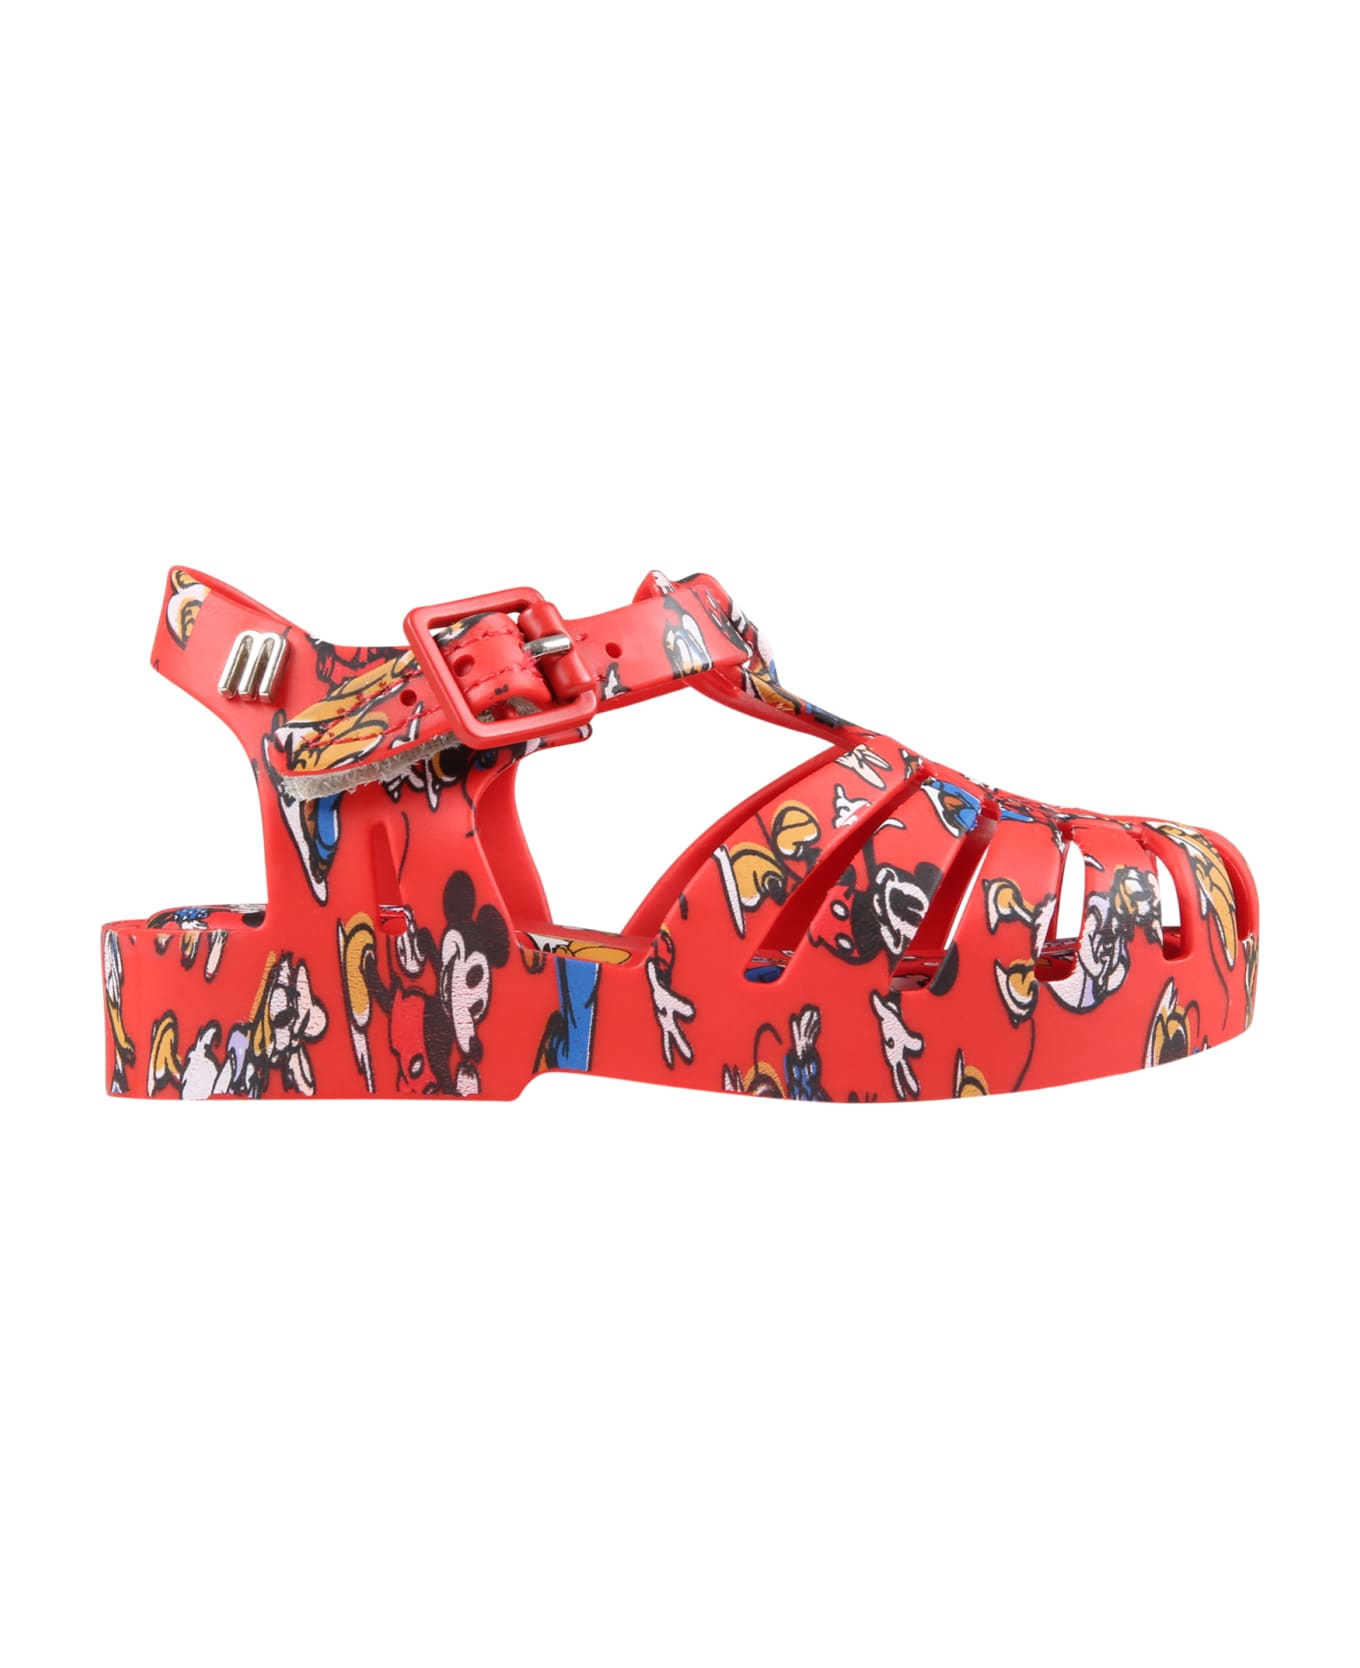 Melissa Red Sandals For Boy With Disney Characters - Red